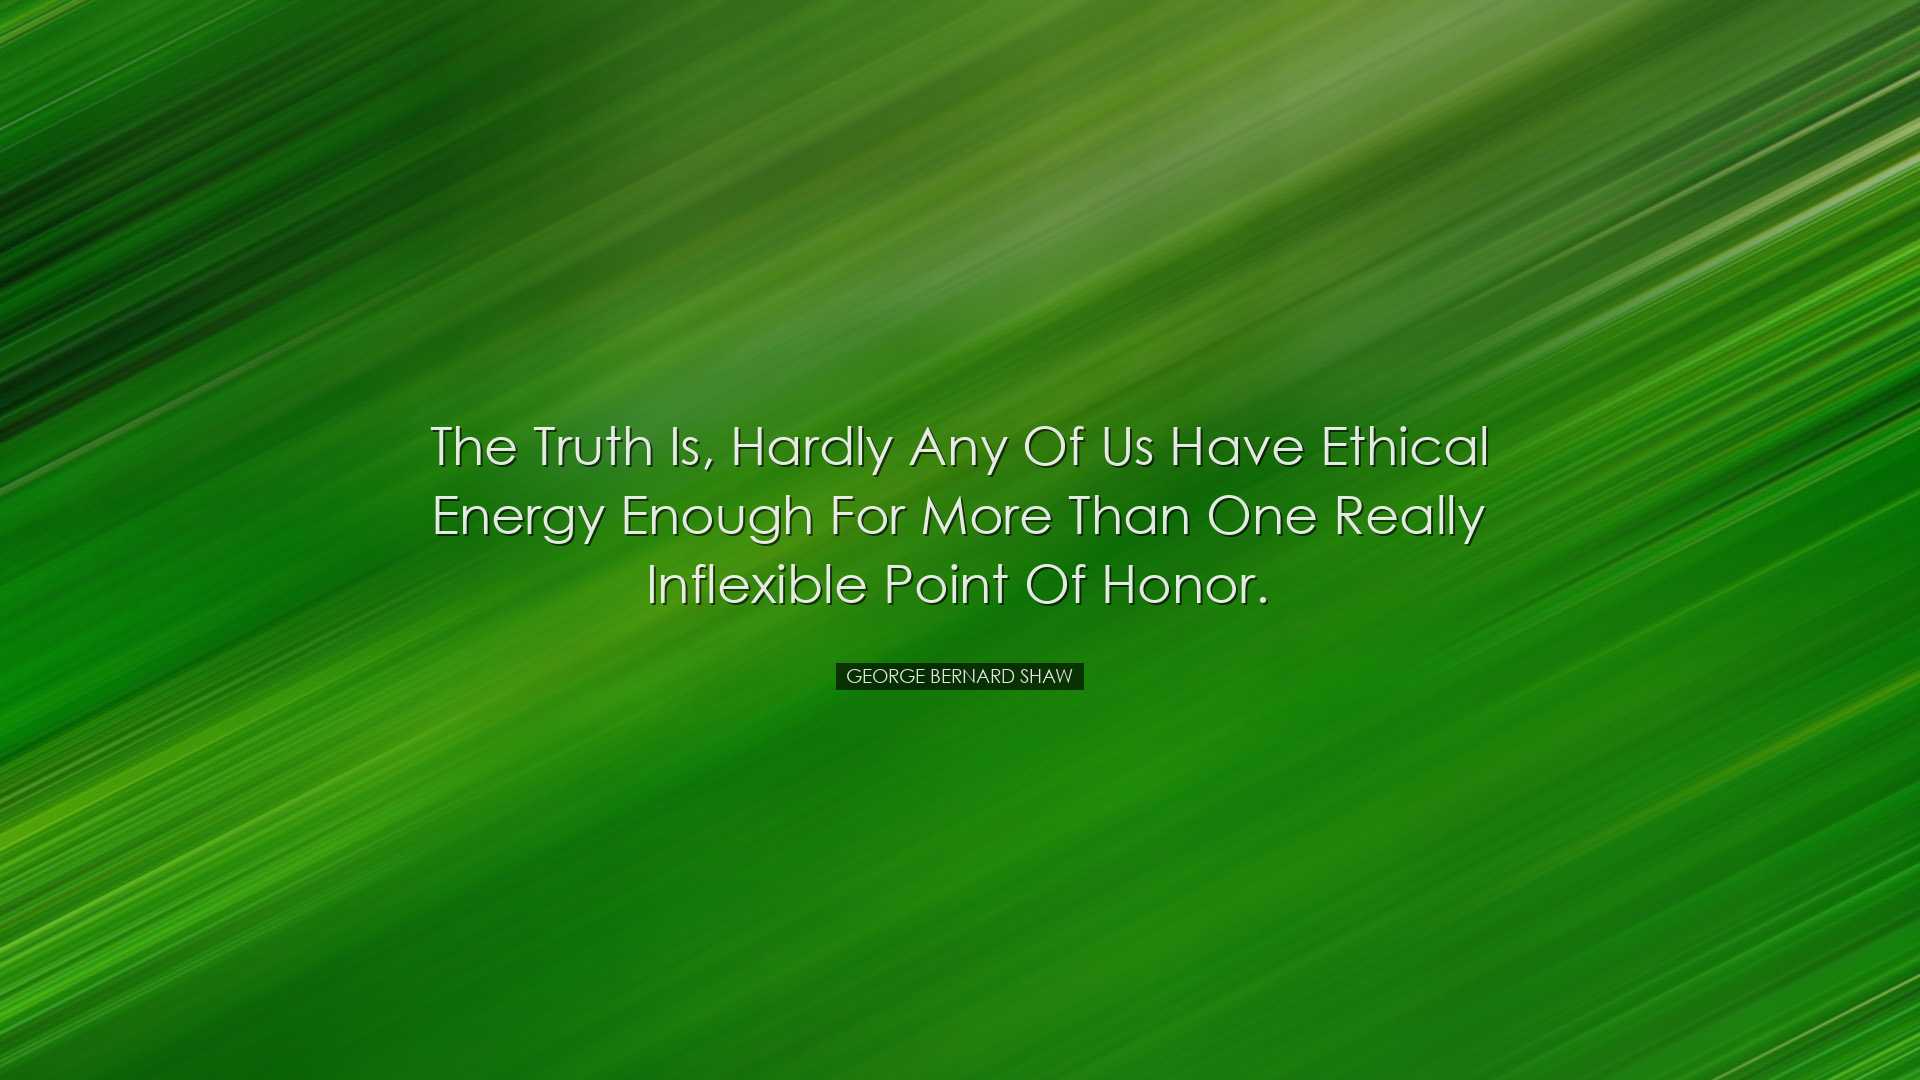 The truth is, hardly any of us have ethical energy enough for more